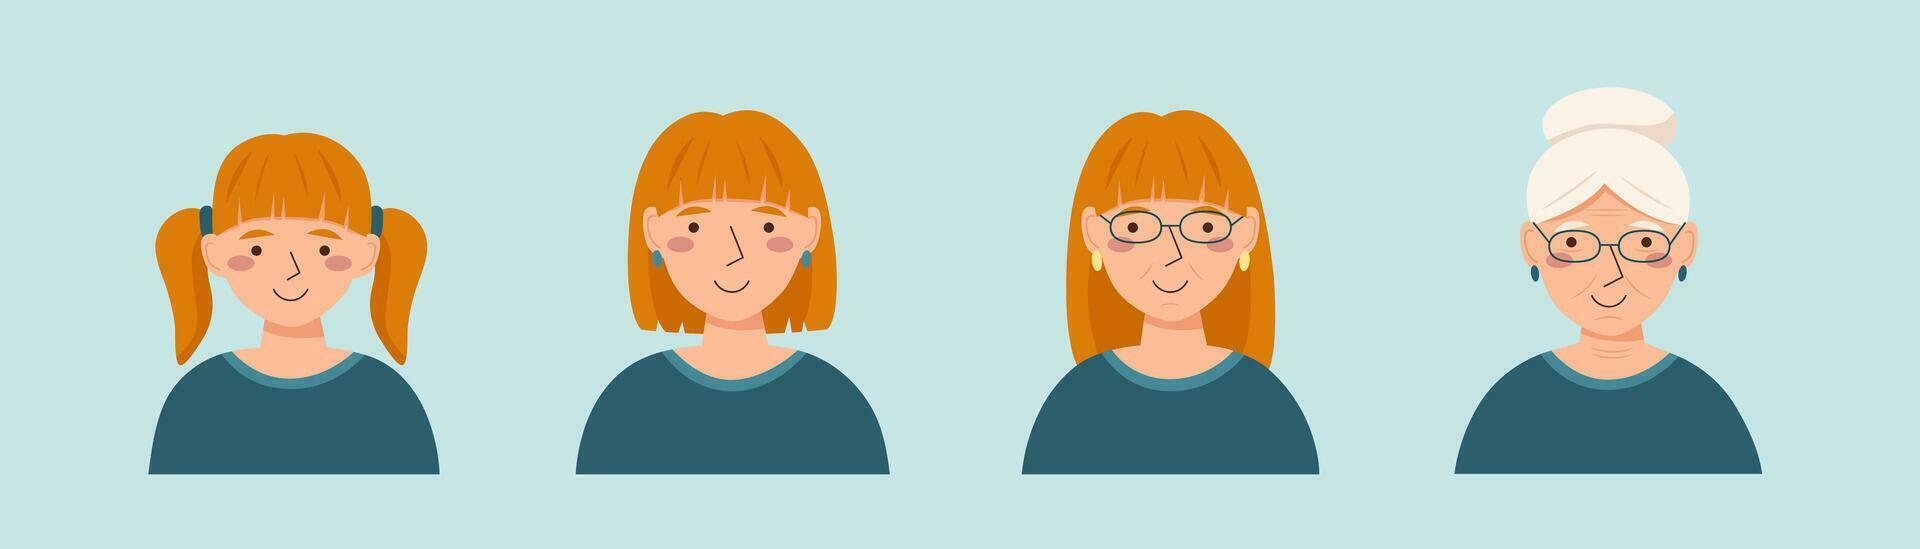 Ages of woman avatars collection vector